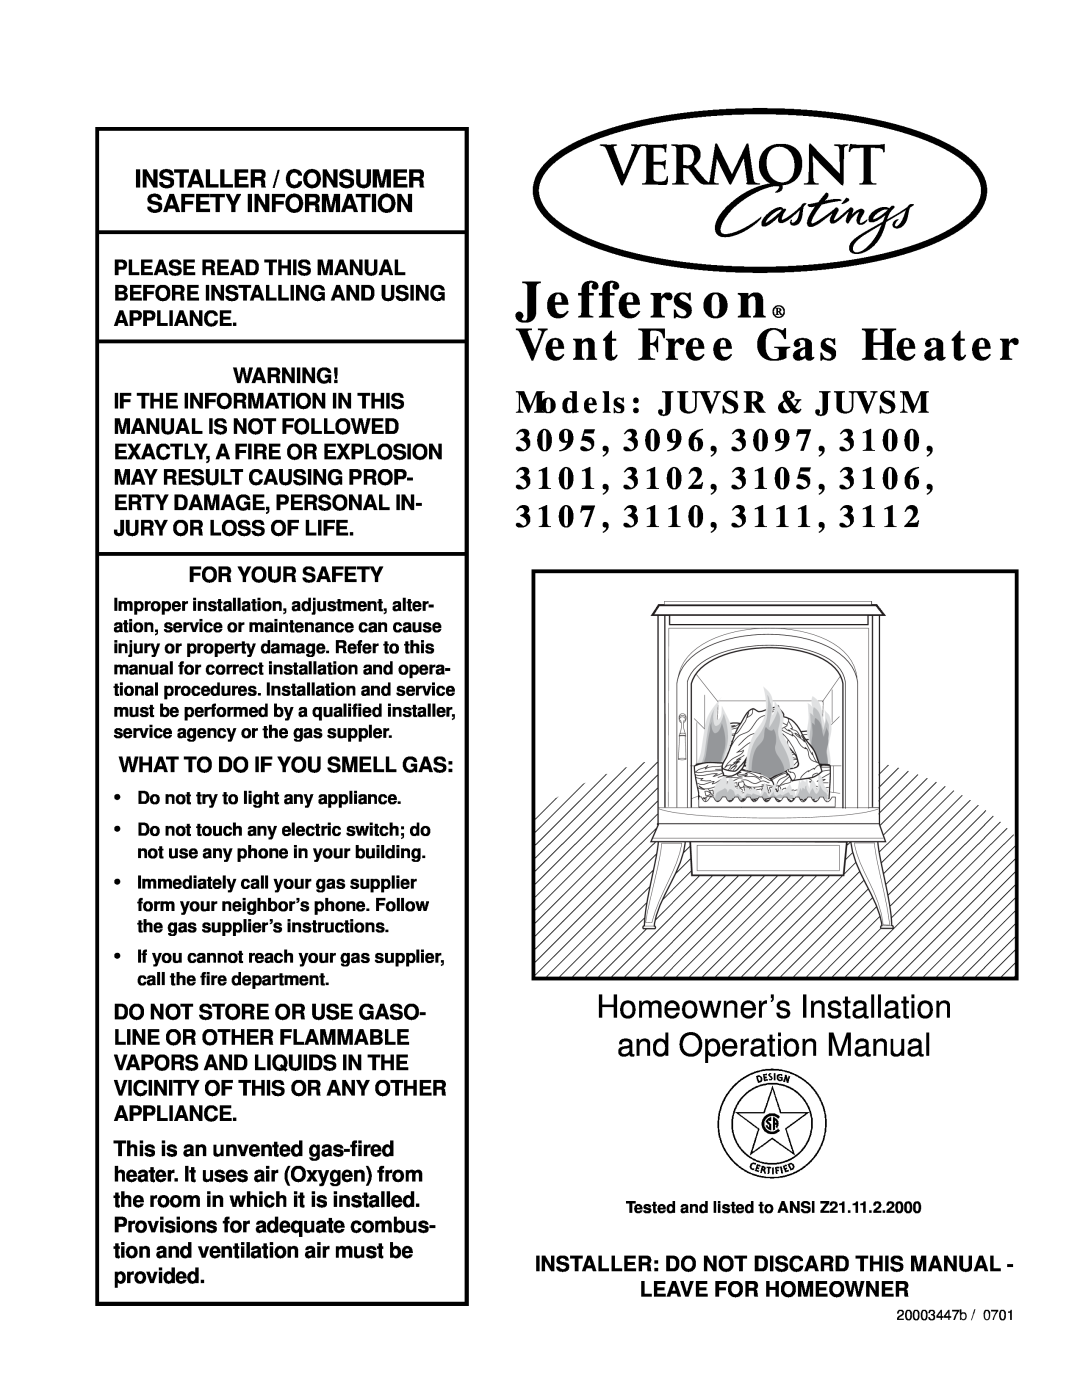 Majestic Appliances 3111, 3112 operation manual Installer / Consumer Safety Information, Jefferson, Vent Free Gas Heater 